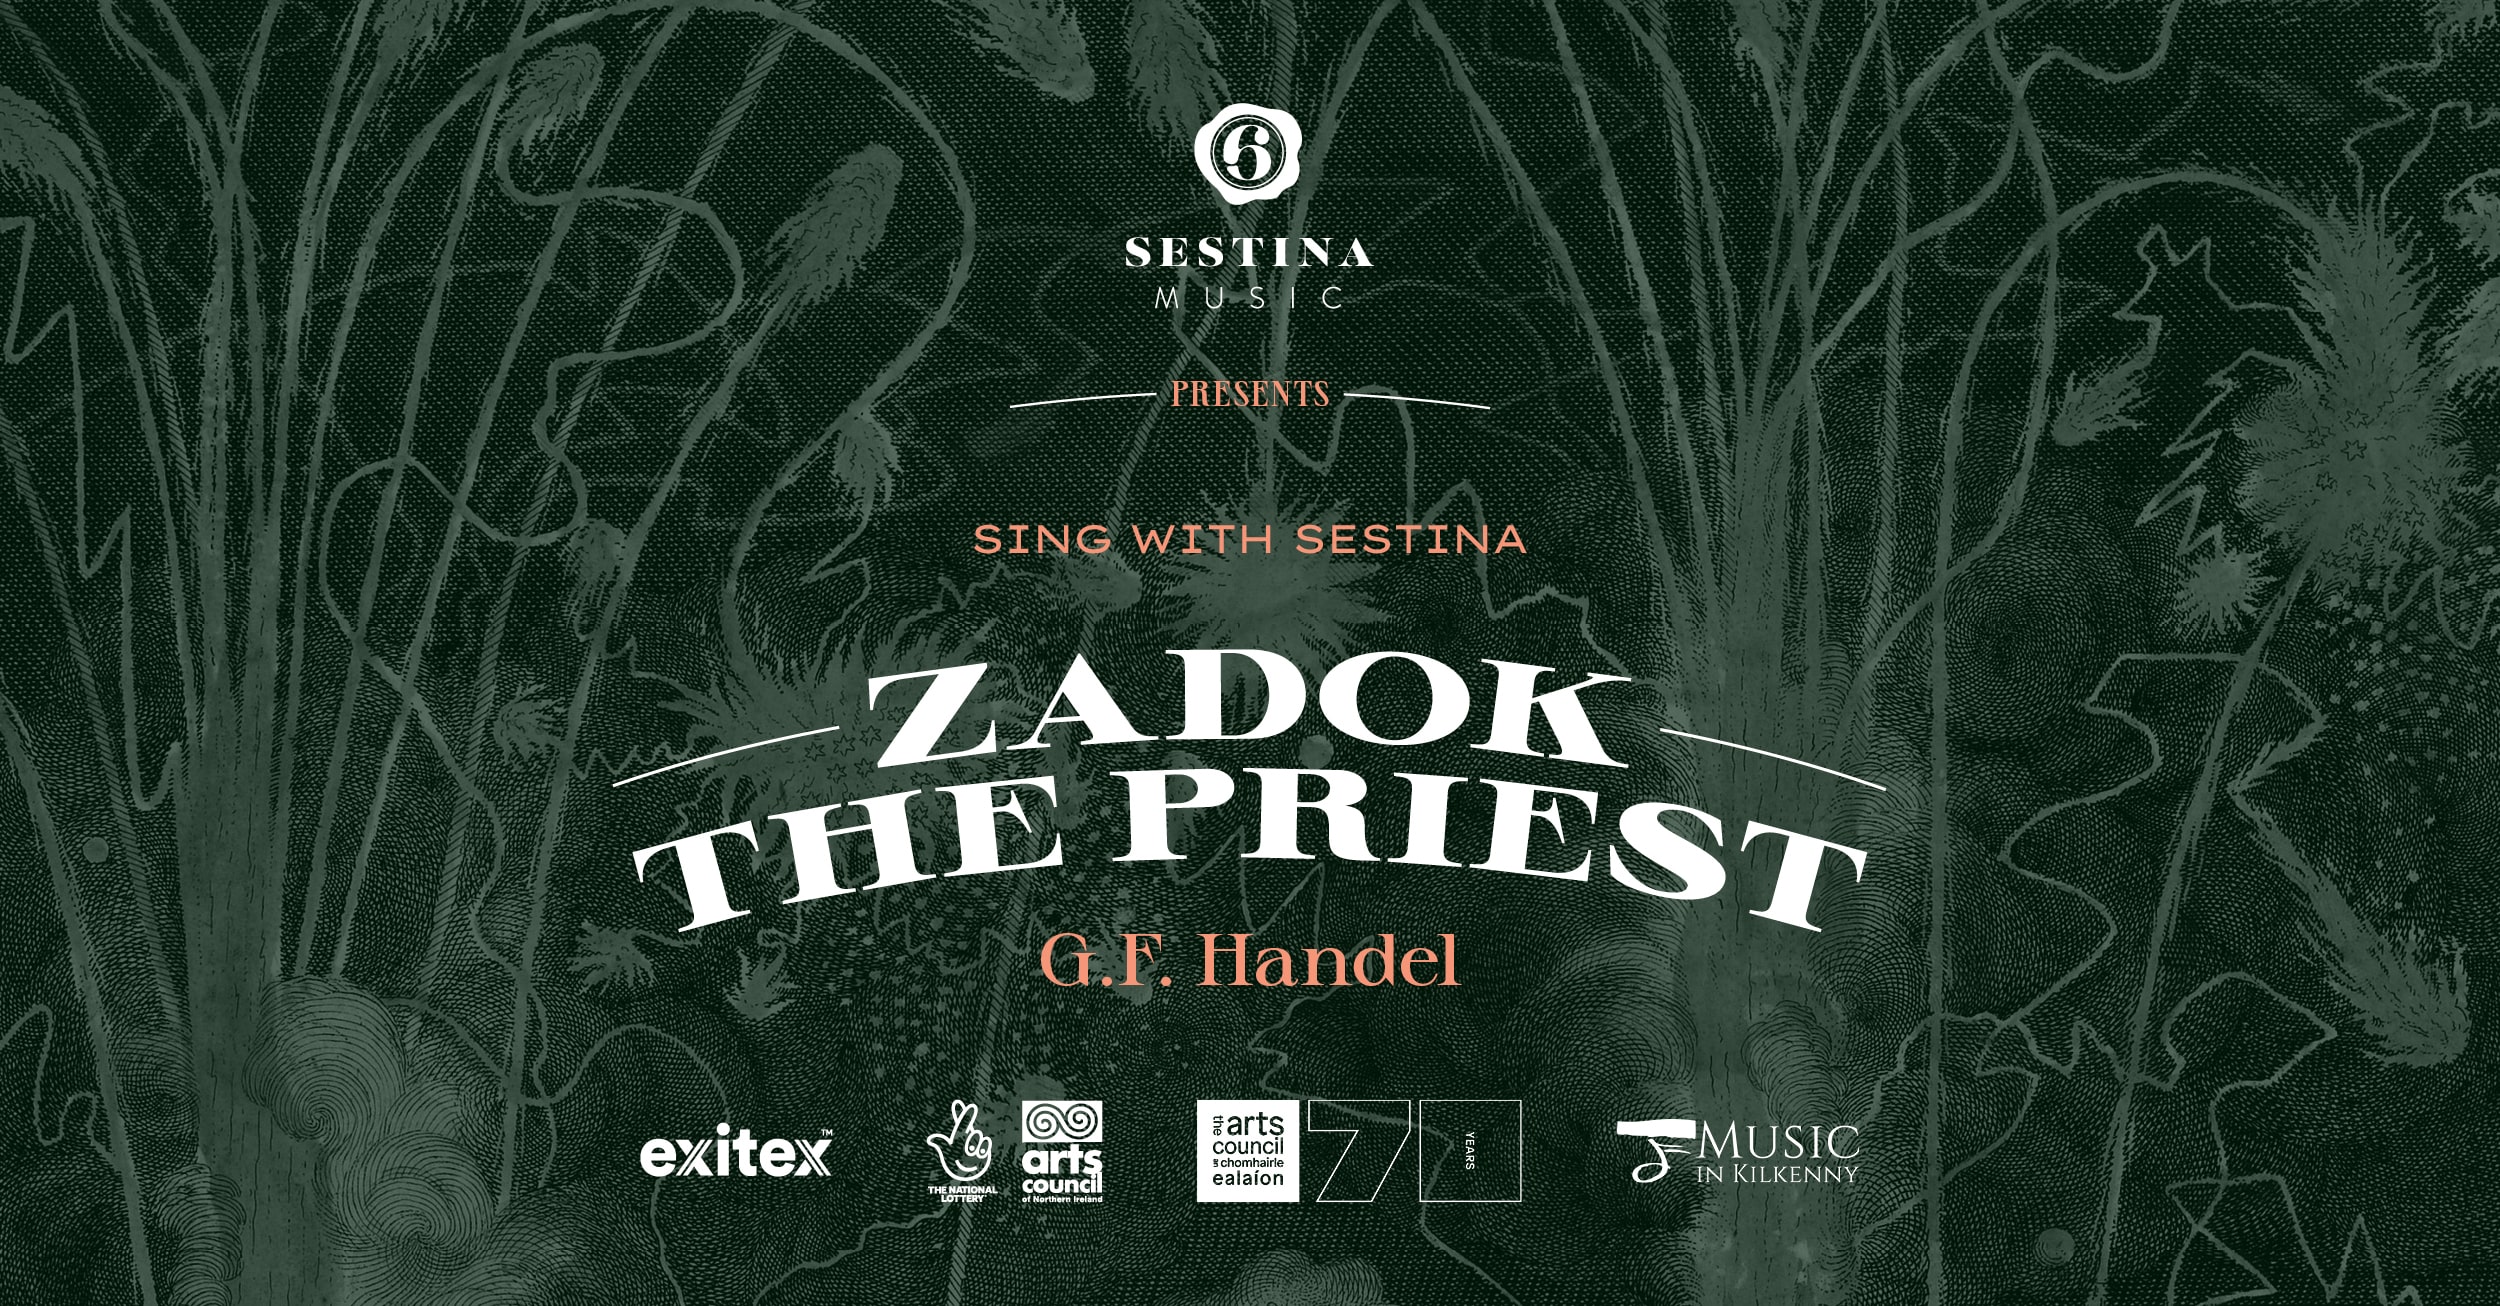 Sing with Sestina: Zadok the Priest